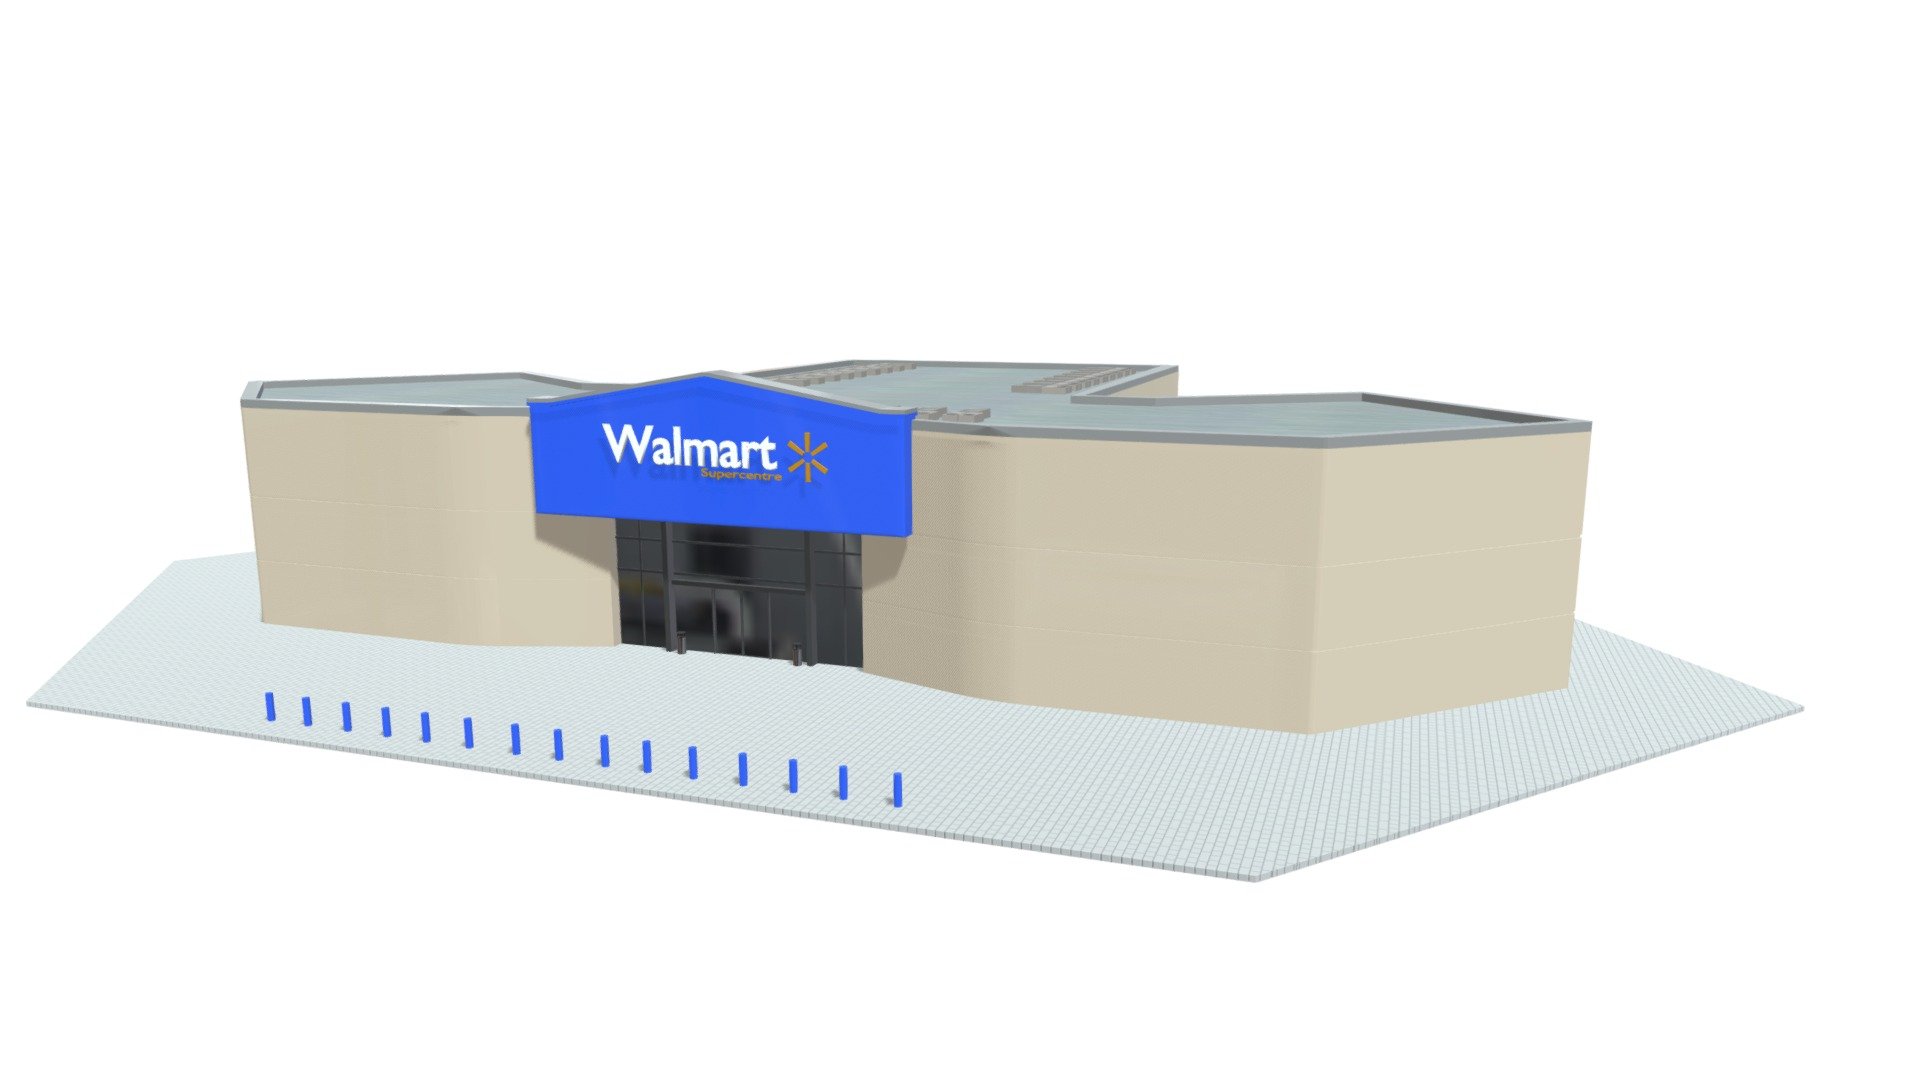 3D model of Walmart Shopping center.
Made with blender.
Low poly, realistic, game ready.
Textures and materials included 3d model